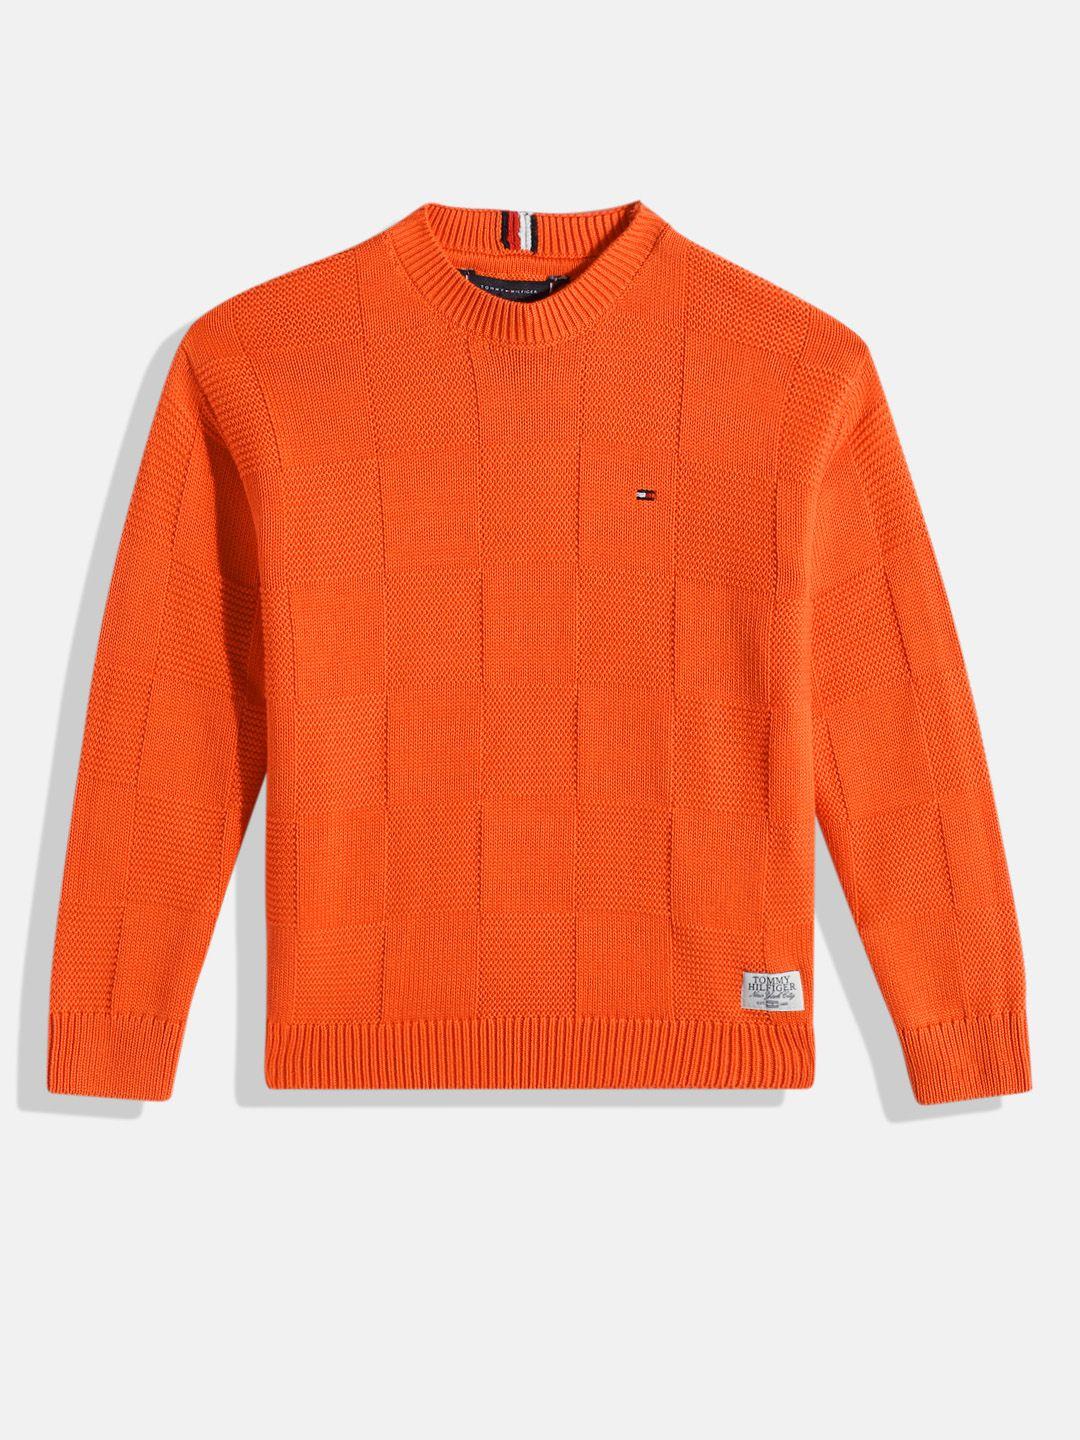 tommy hilfiger boys orange geometric self design knitted pure cotton pullover